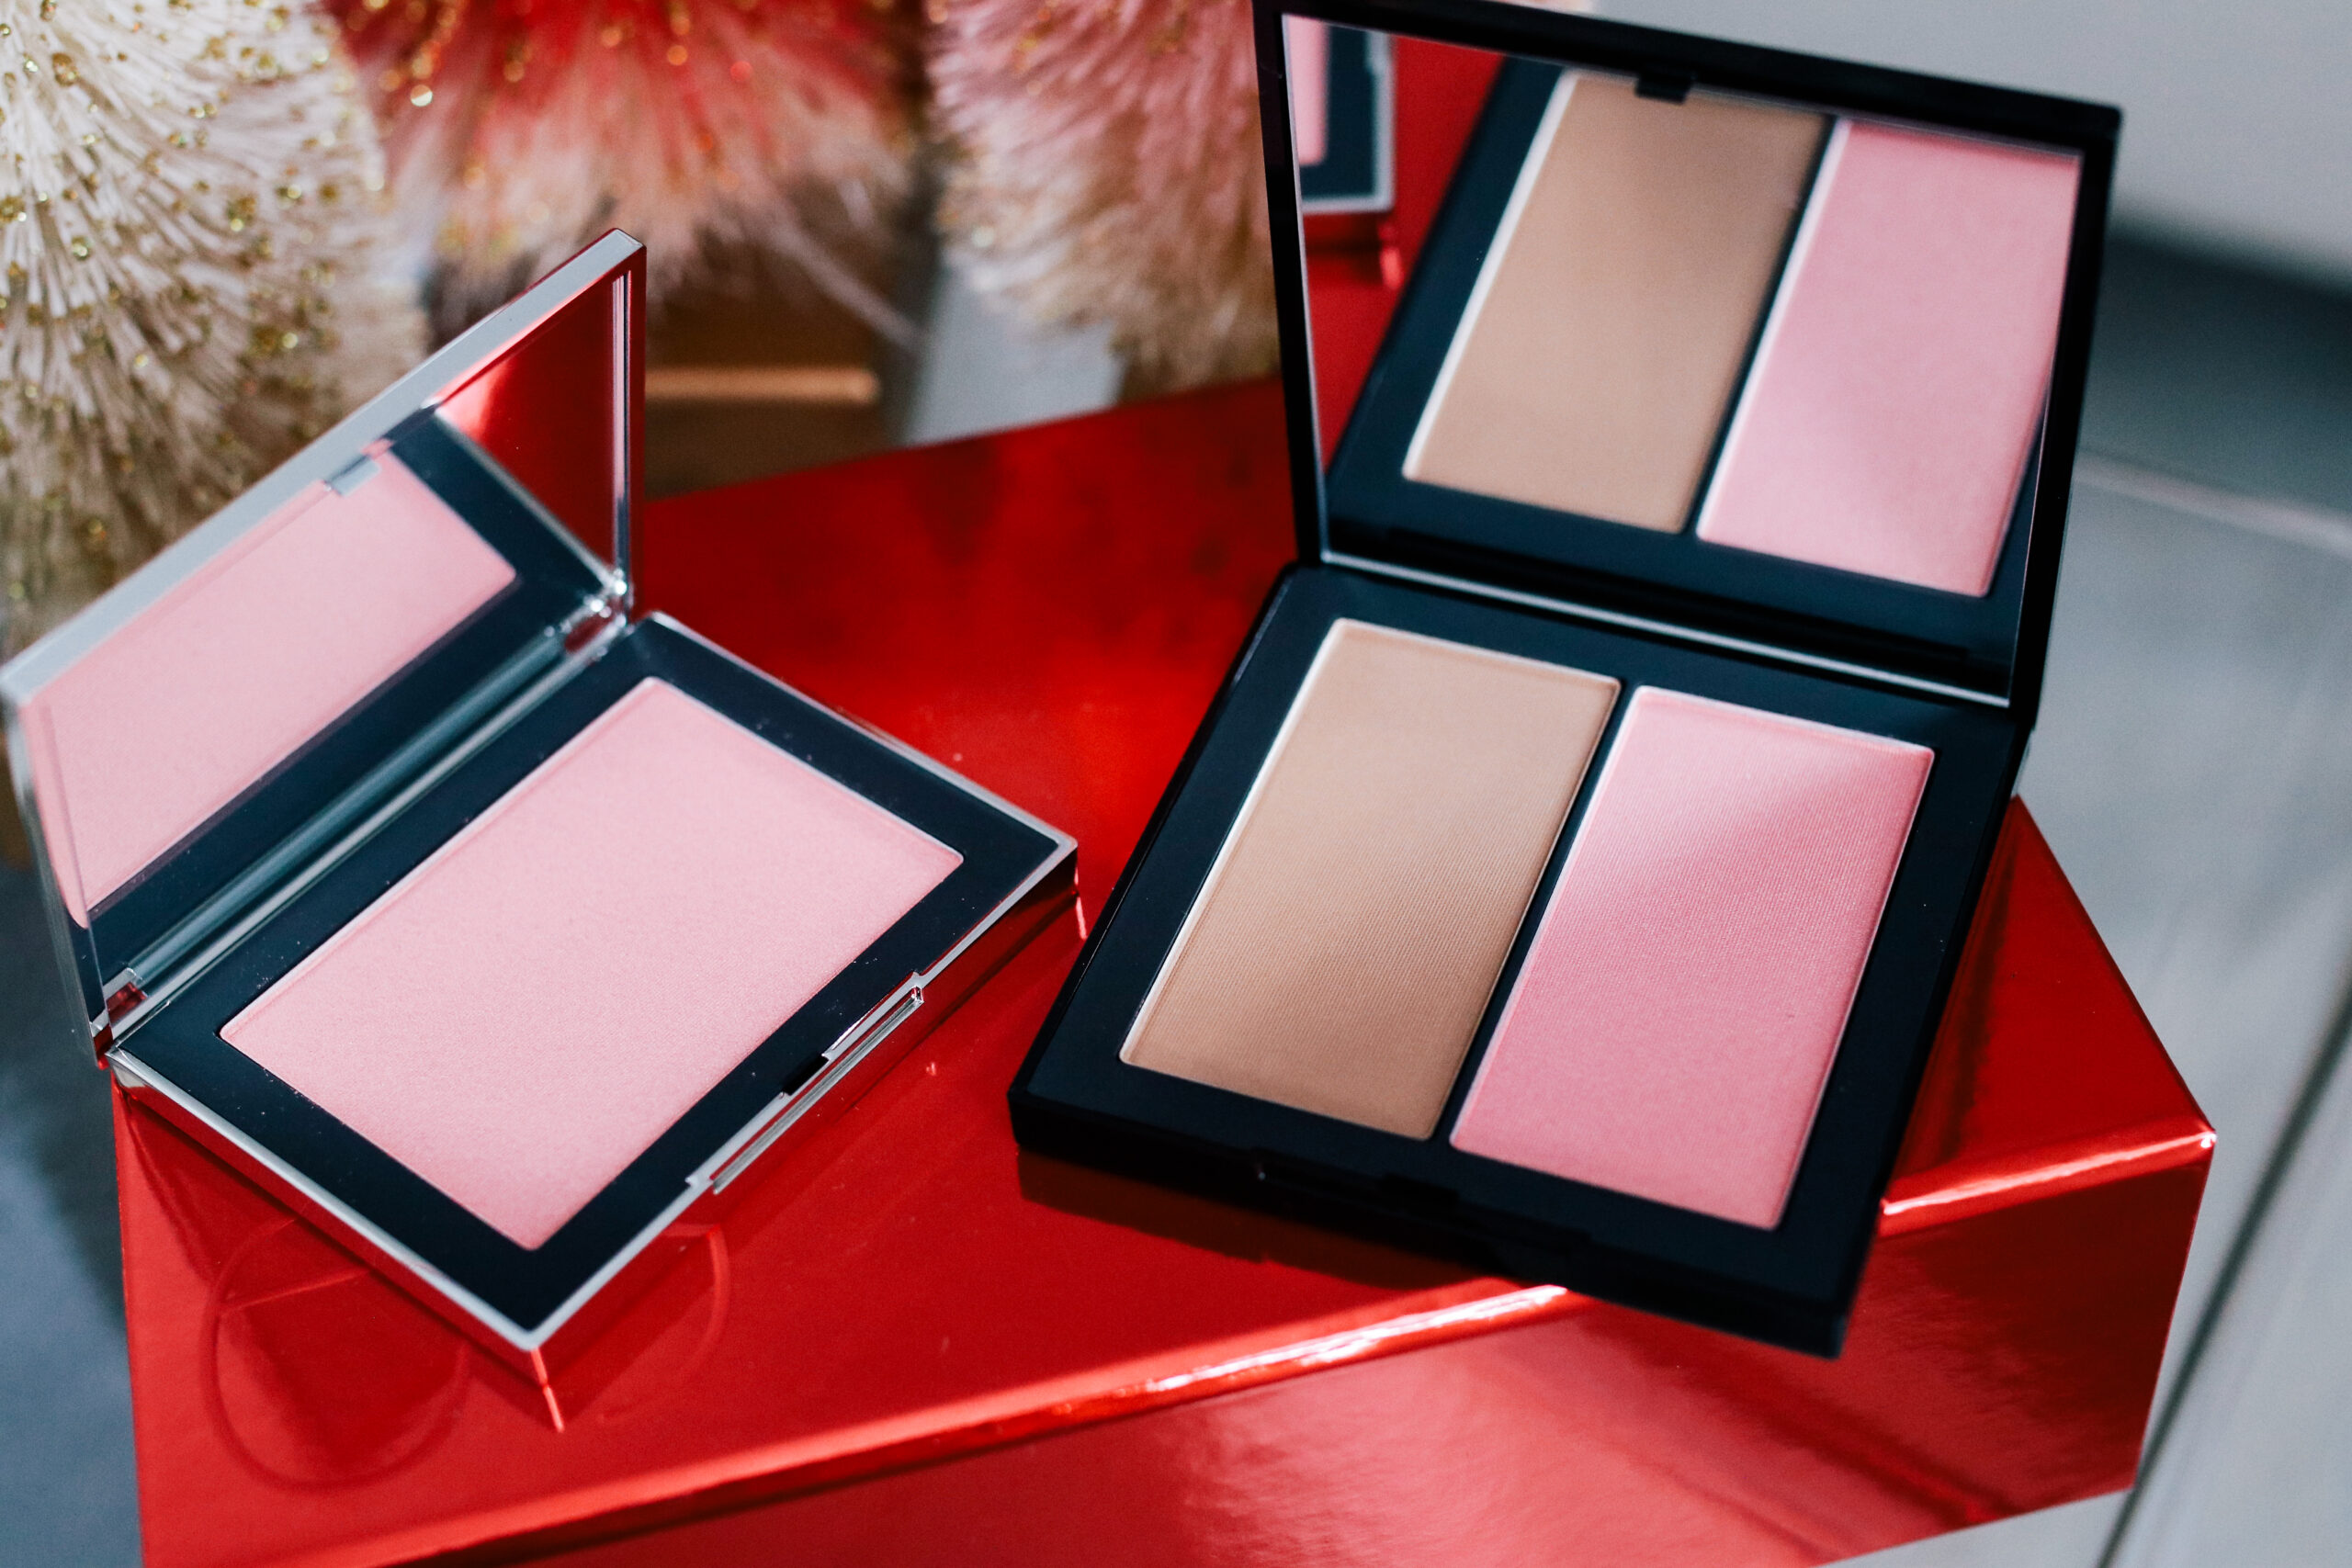 NARS Holiday 2020 Collection Review + Swatches alittlebitetc